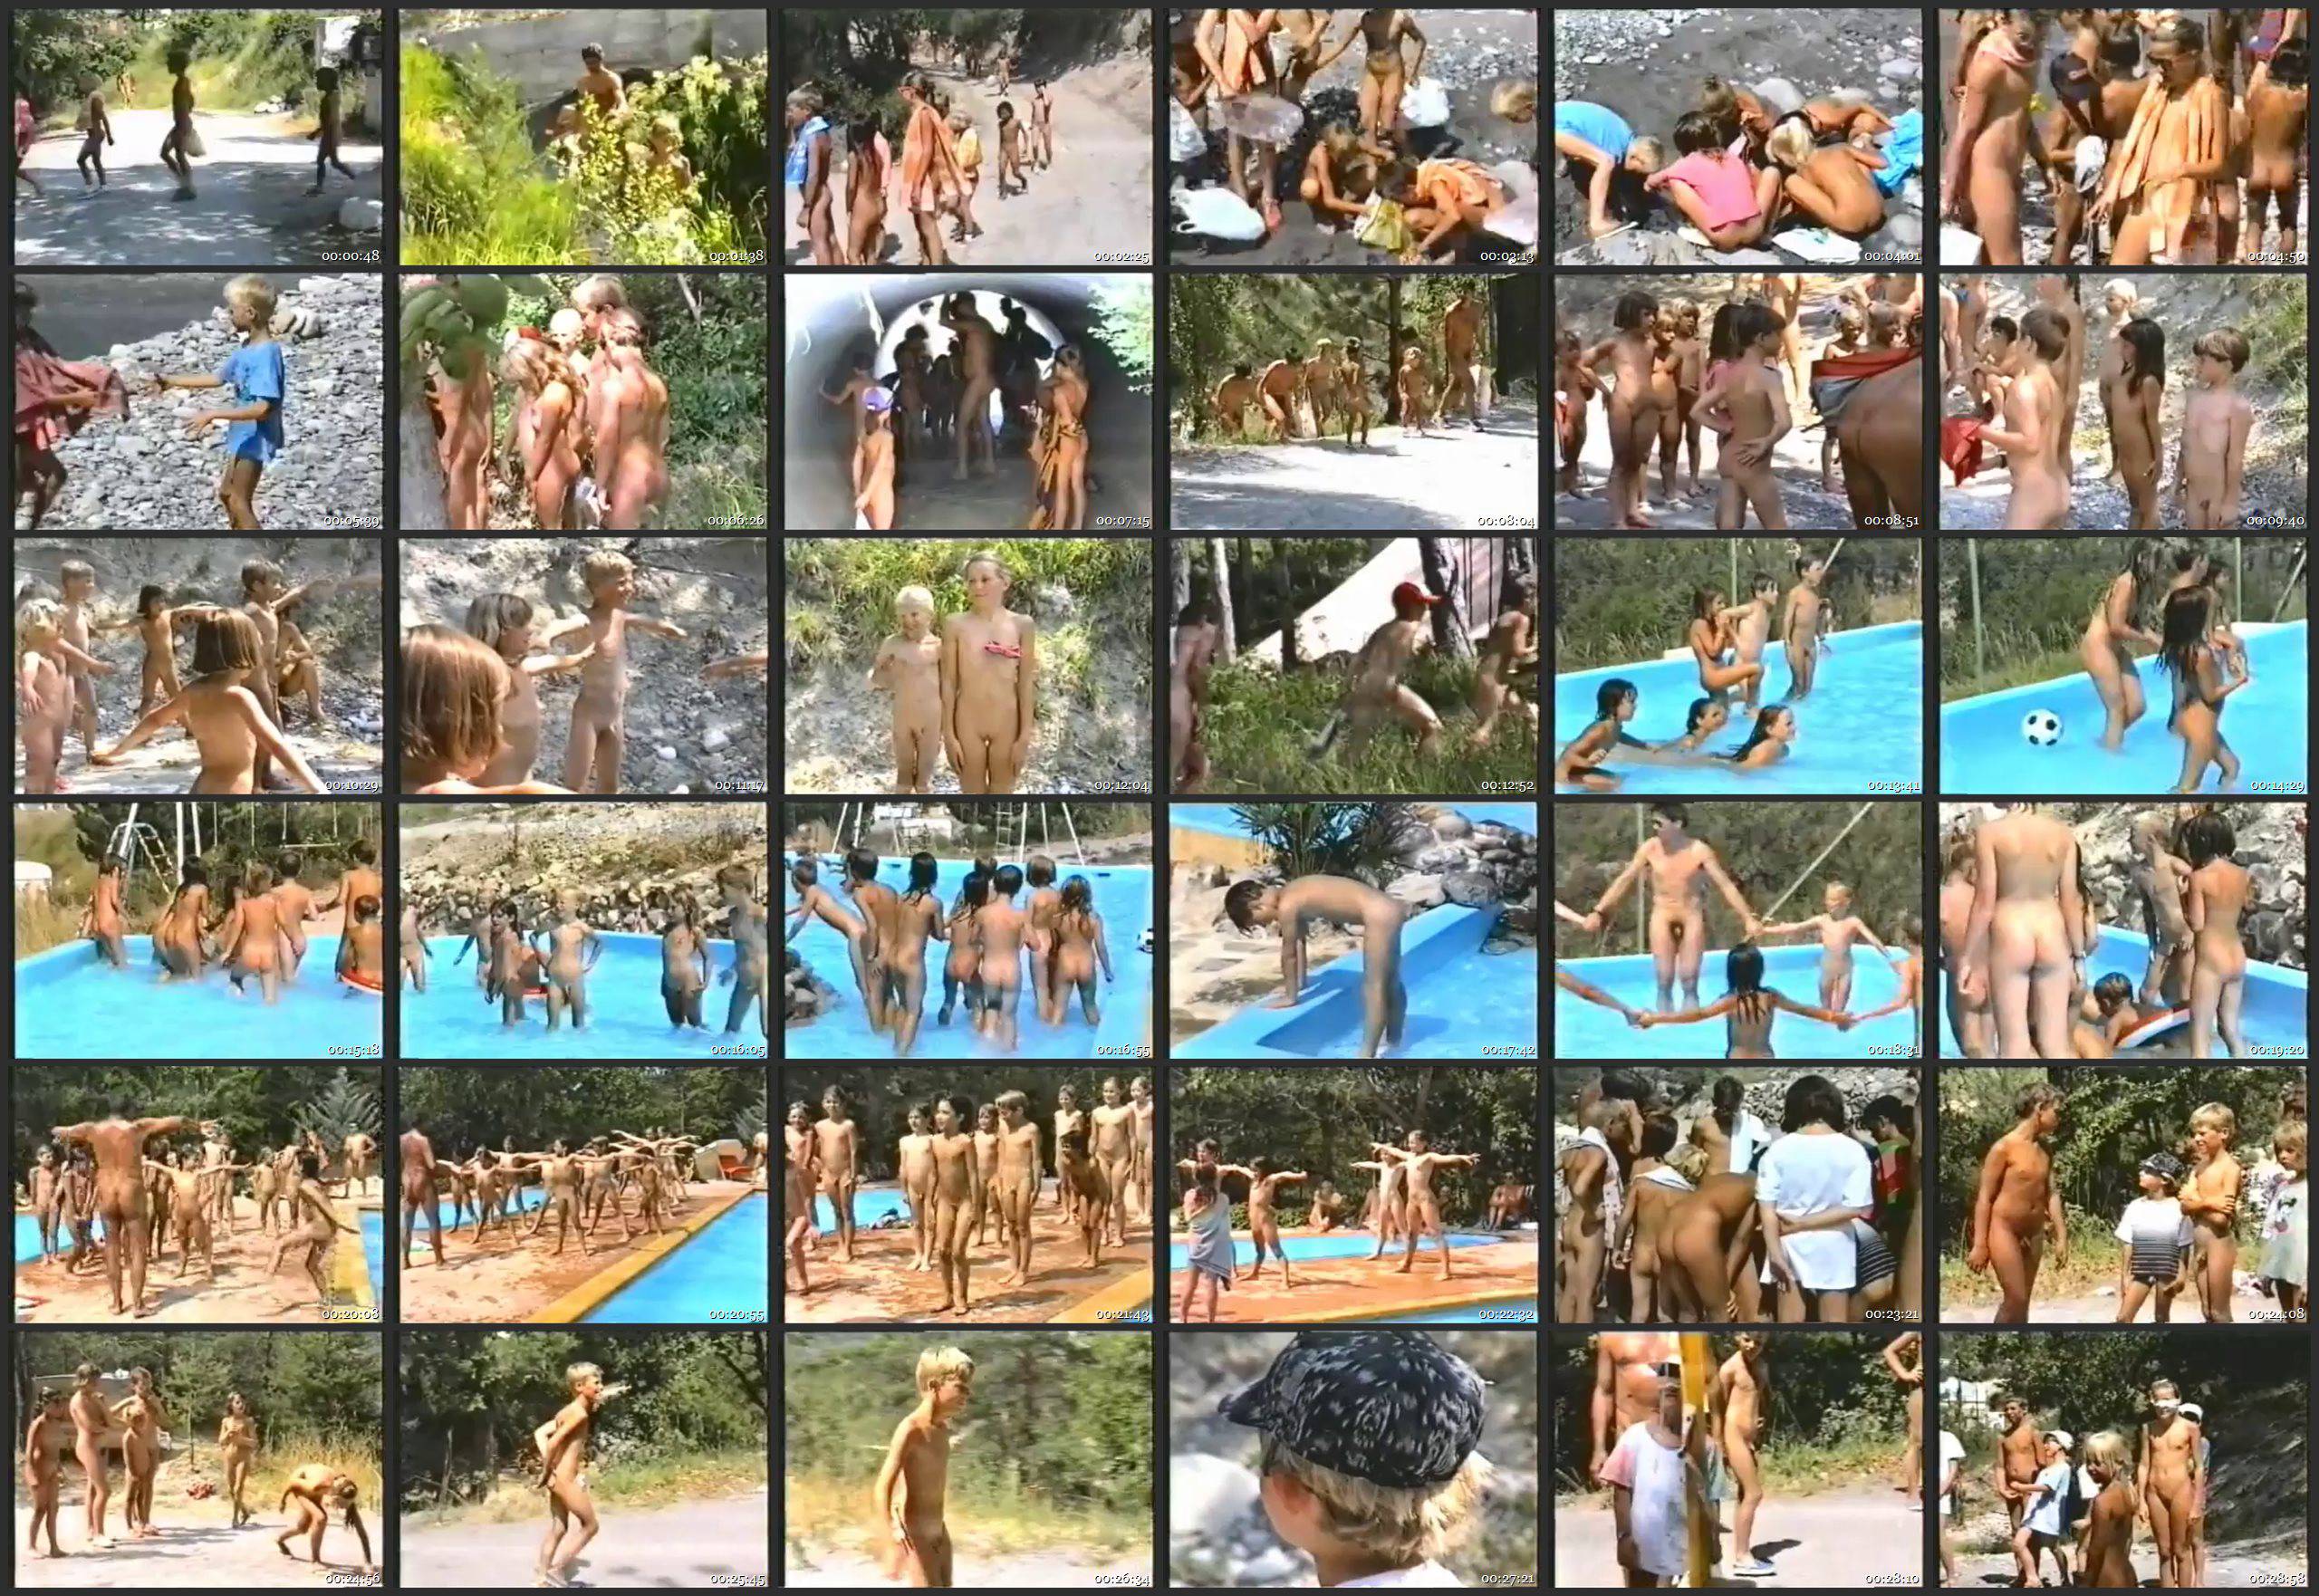 Other Nudist Videos Summer Fun and Games - Thumbnails